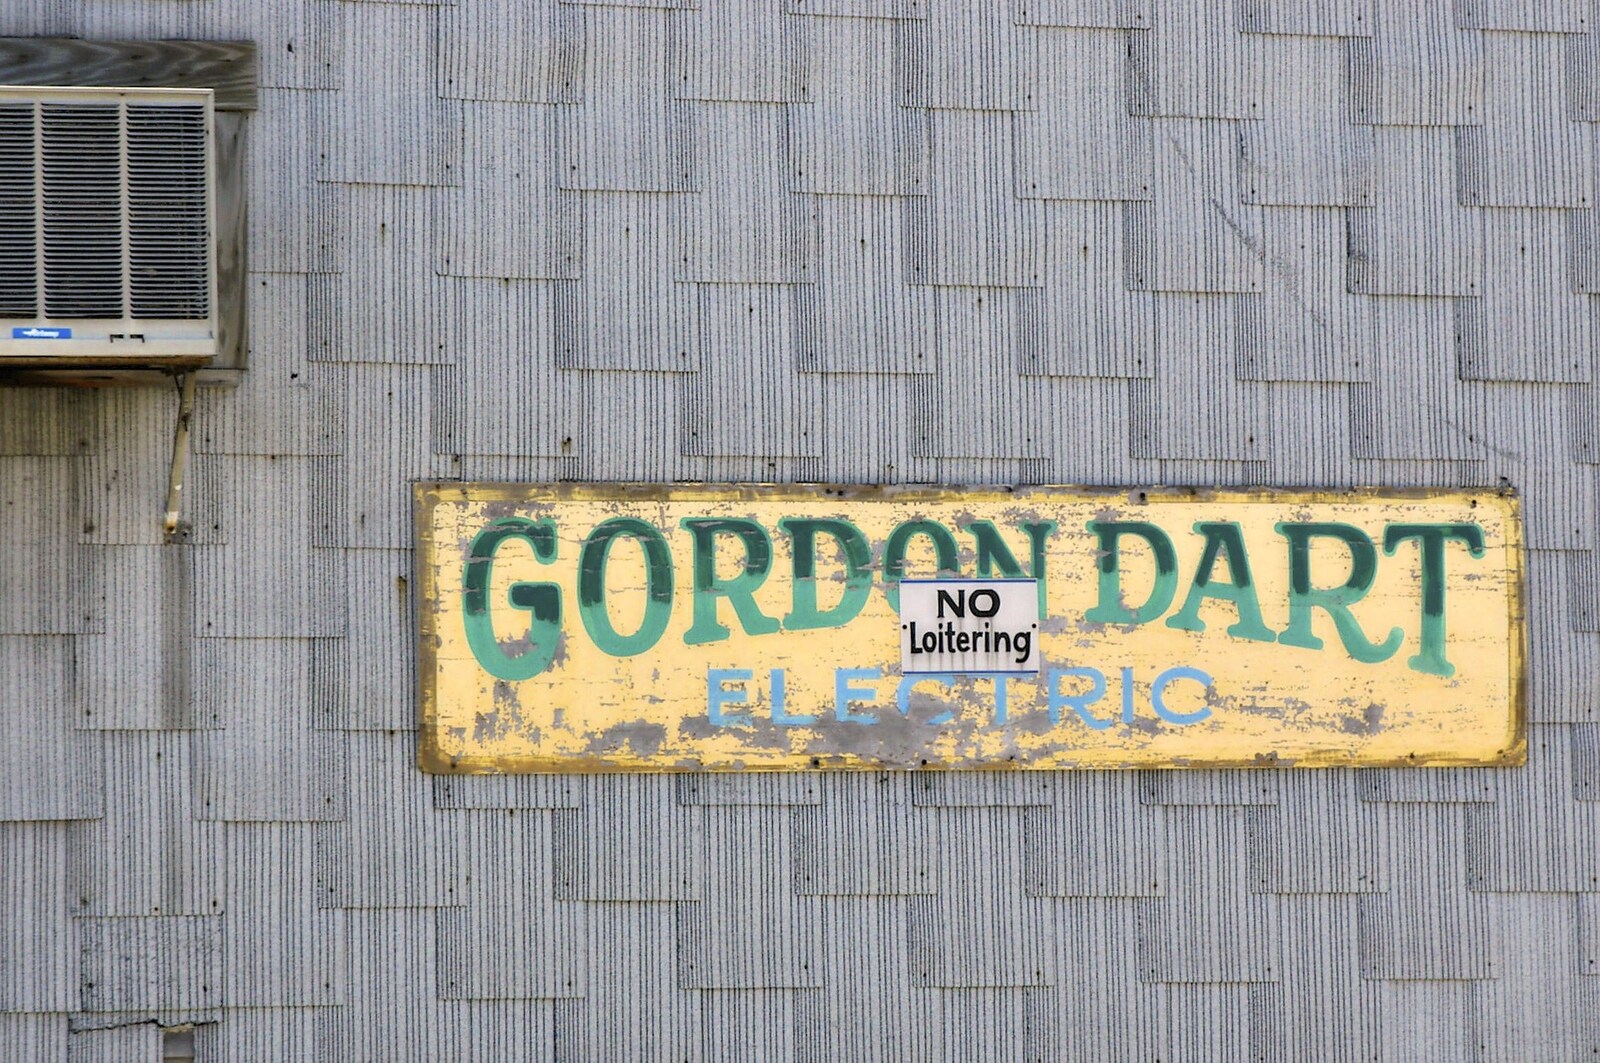 Gordon Dart Electric says 'no loitering' from Maplewood and Little-League Baseball, New Jersey - 29th April 2006